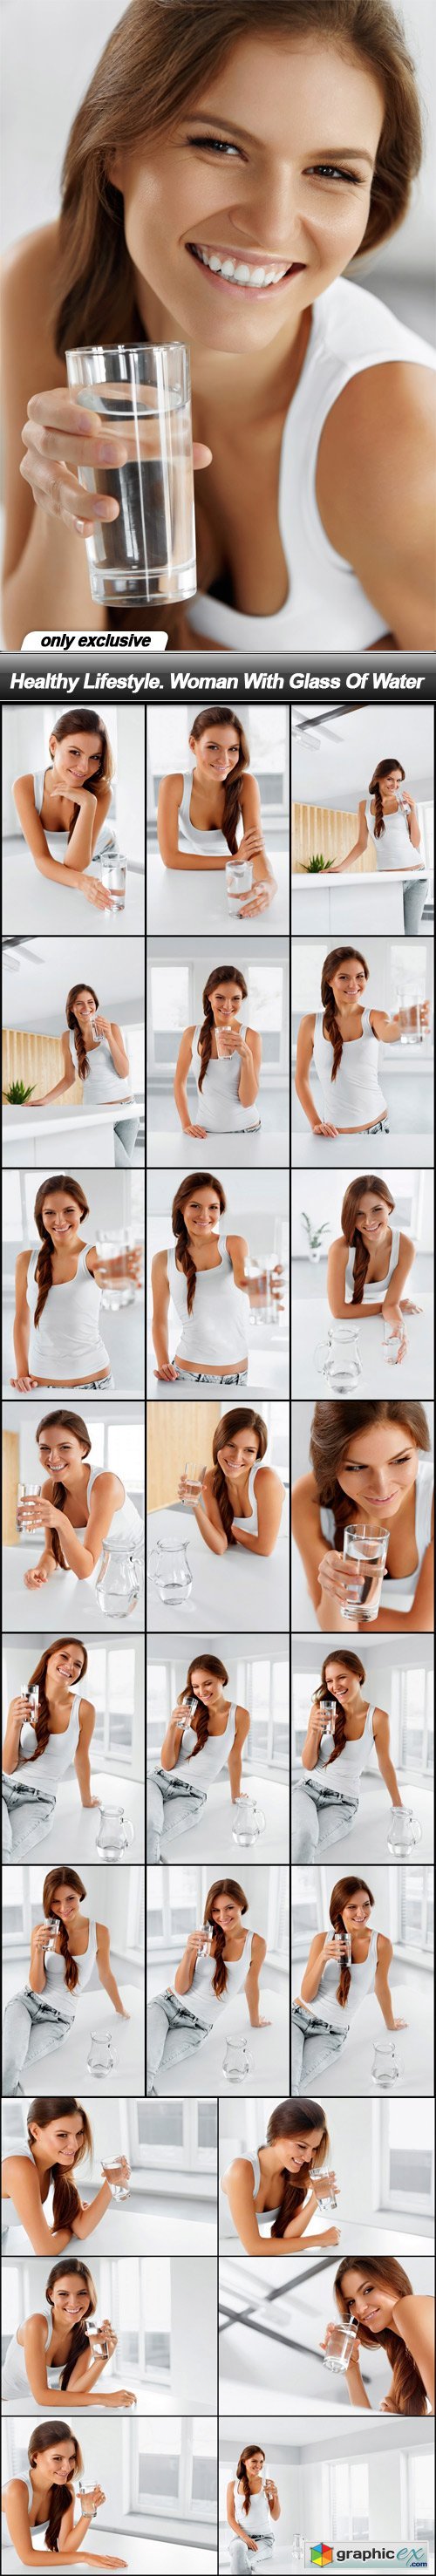 Healthy Lifestyle. Woman With Glass Of Water - 26 UHQ JPEG